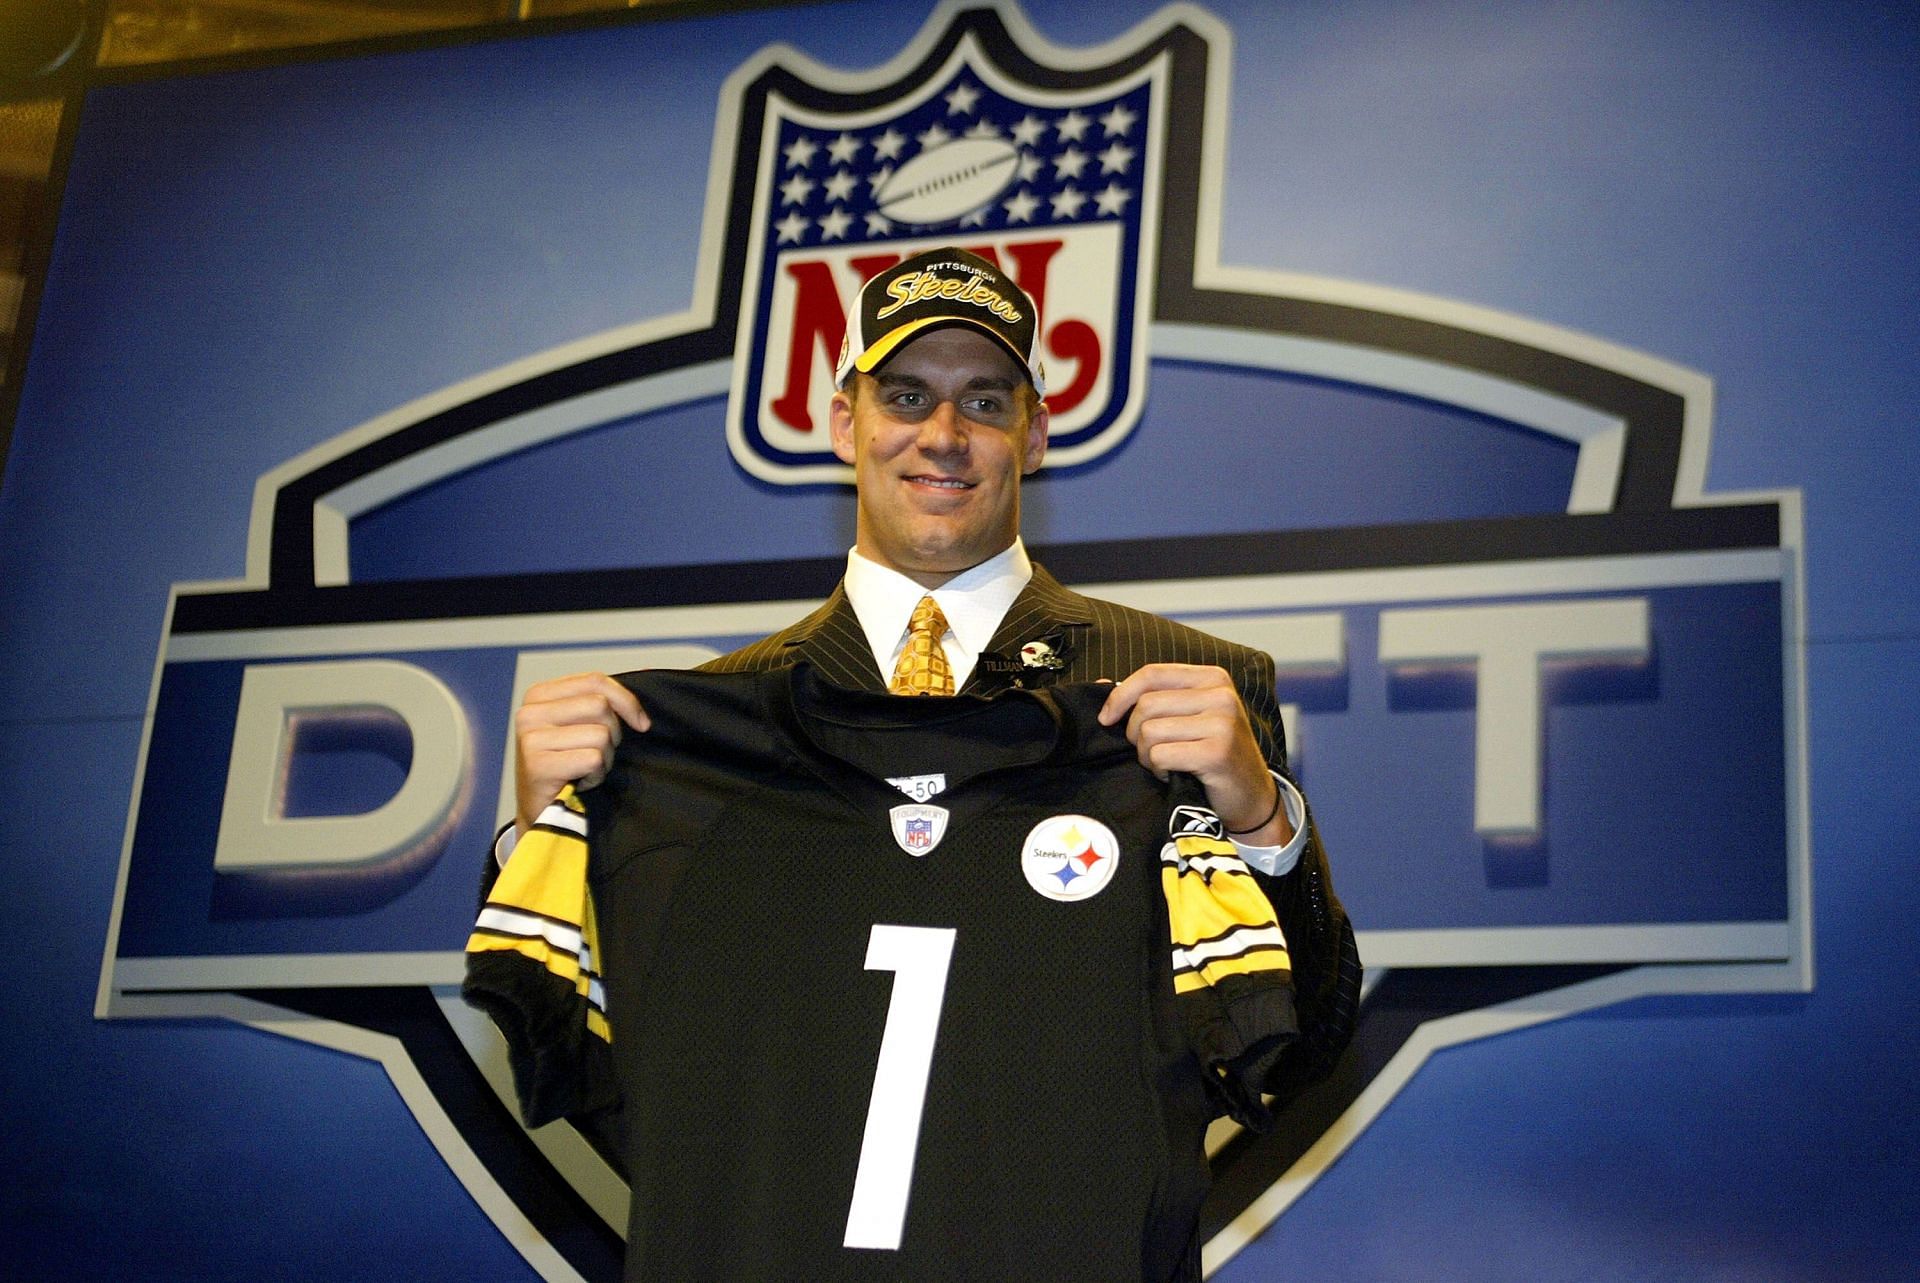 Where does Ben Roethlisberger rank among QBs of the 2004 NFL Draft class?